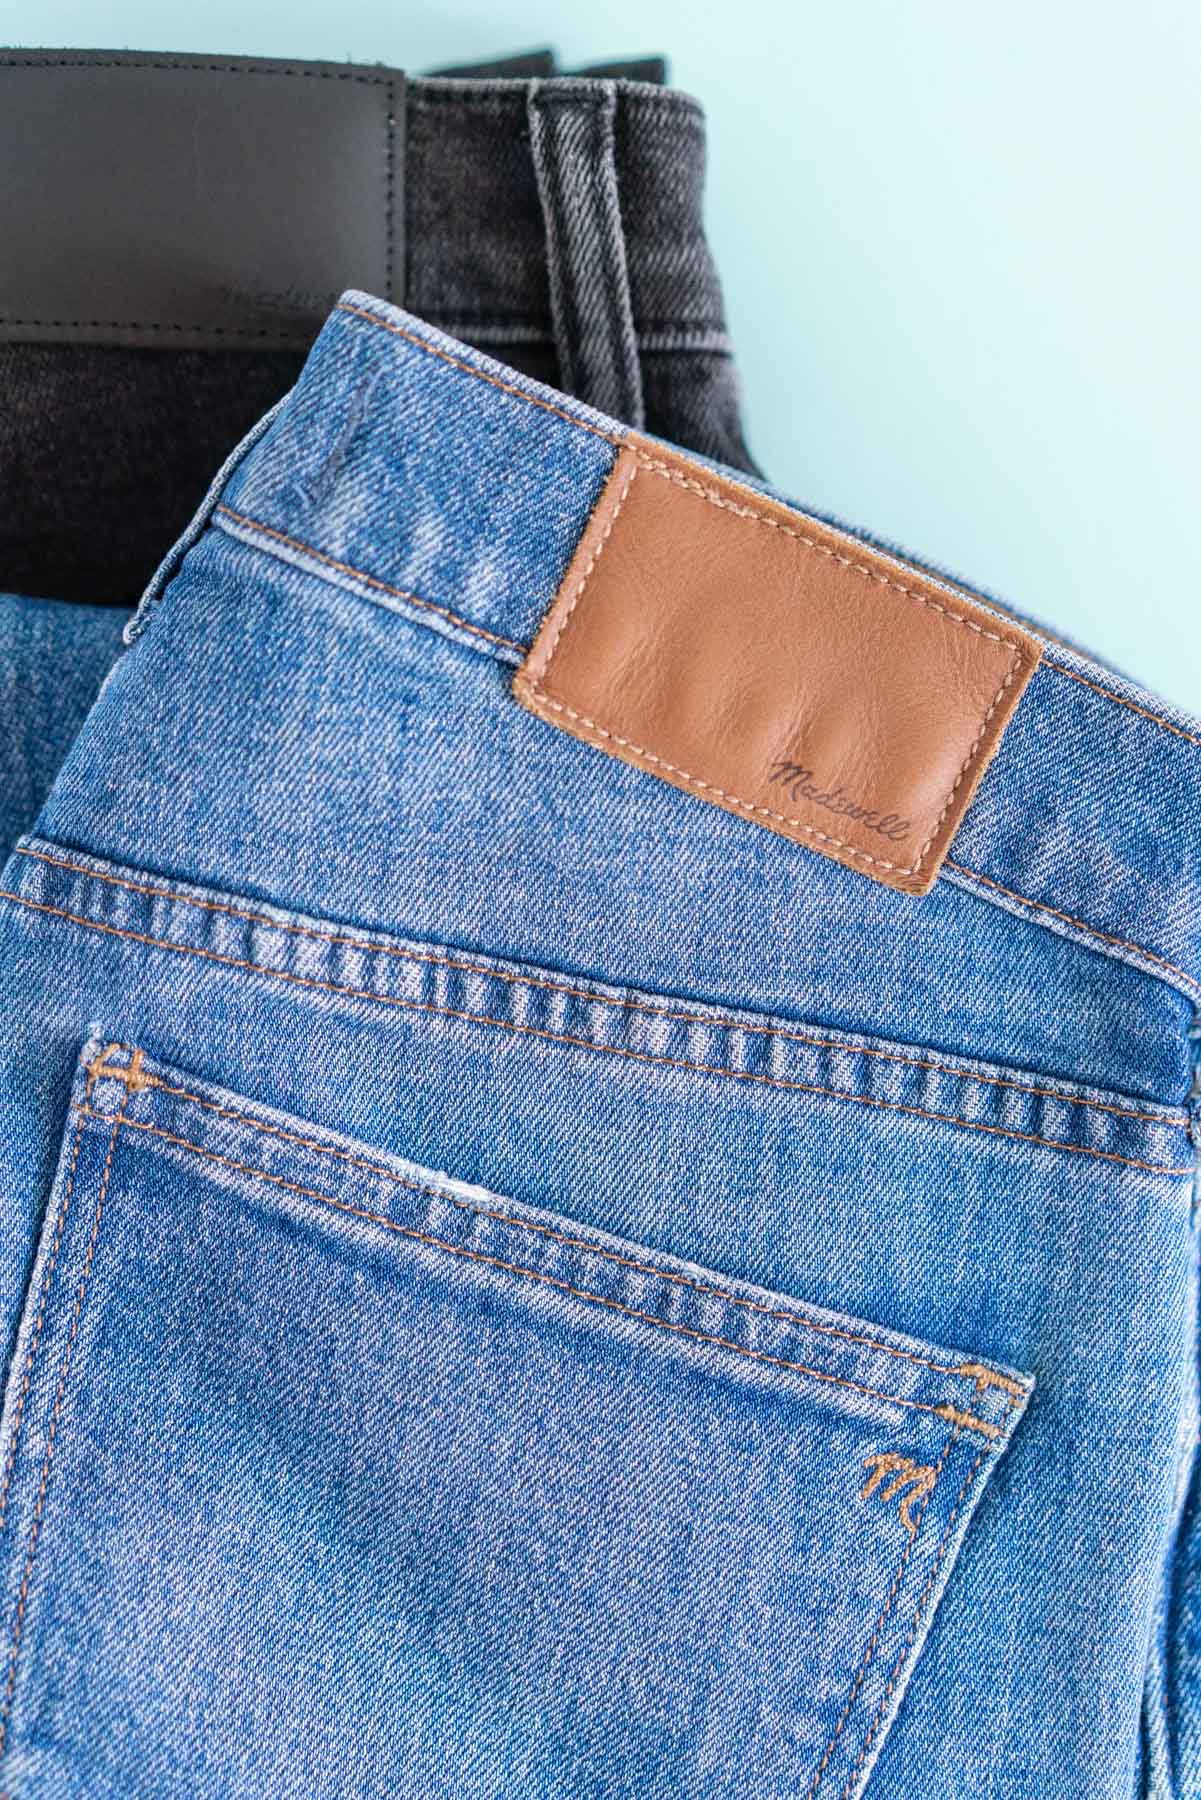 Detail of a back leather patch on Madewell jeans